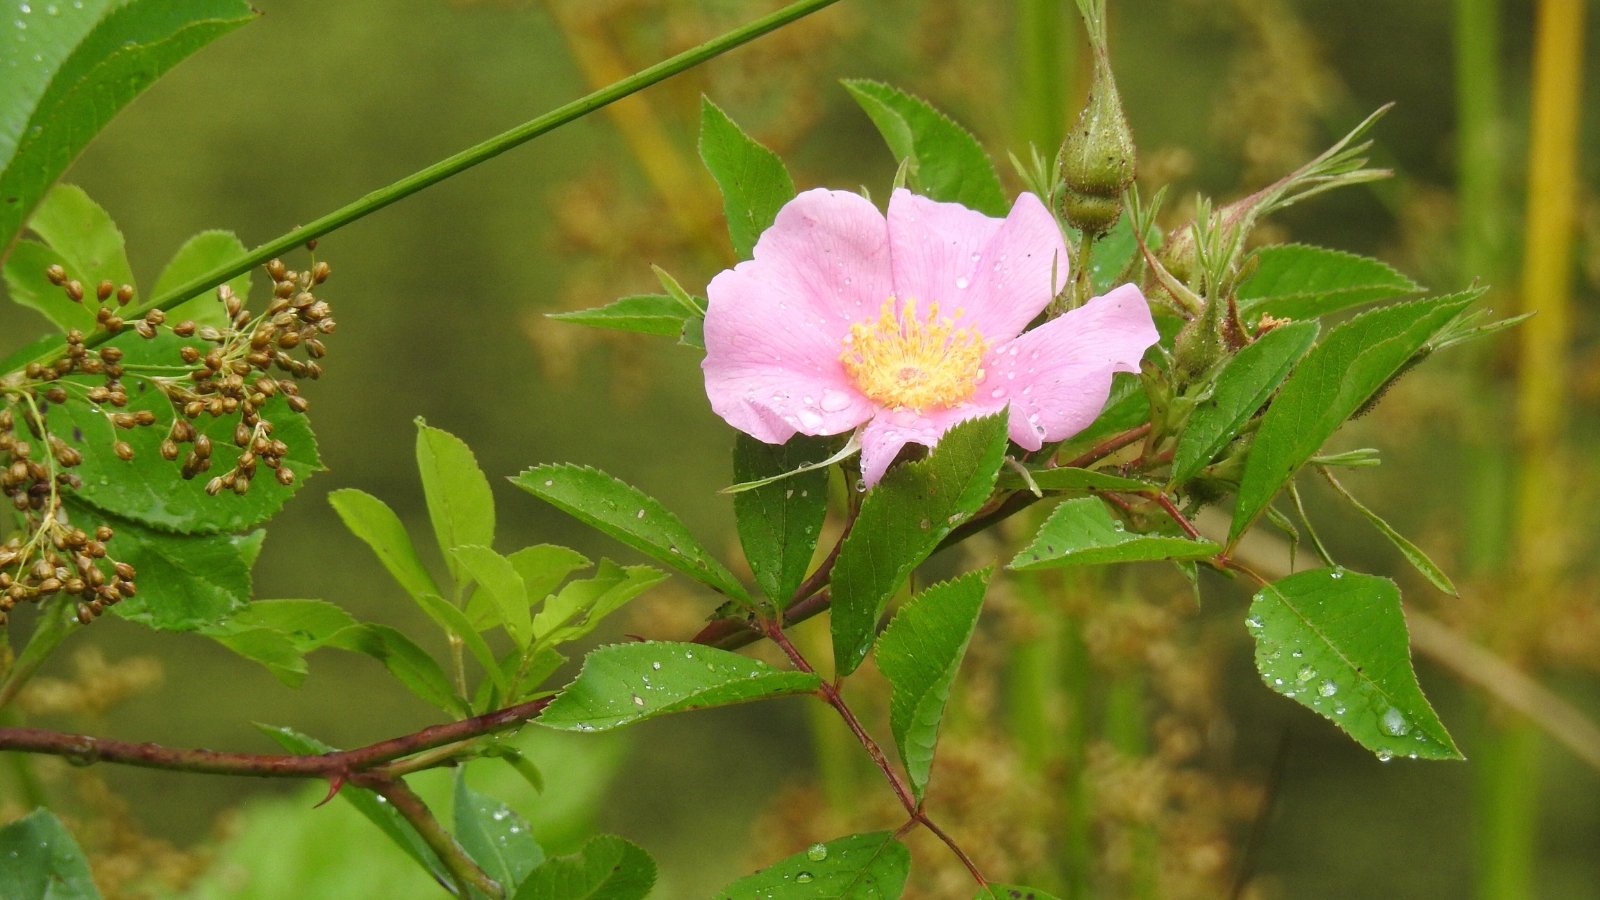 Close-up of a blooming Rosa palustris which displays slender, thorny stems with glossy, dark green, serrated leaves and delicate, single-petaled pink flowers with a cluster of yellow stamens.